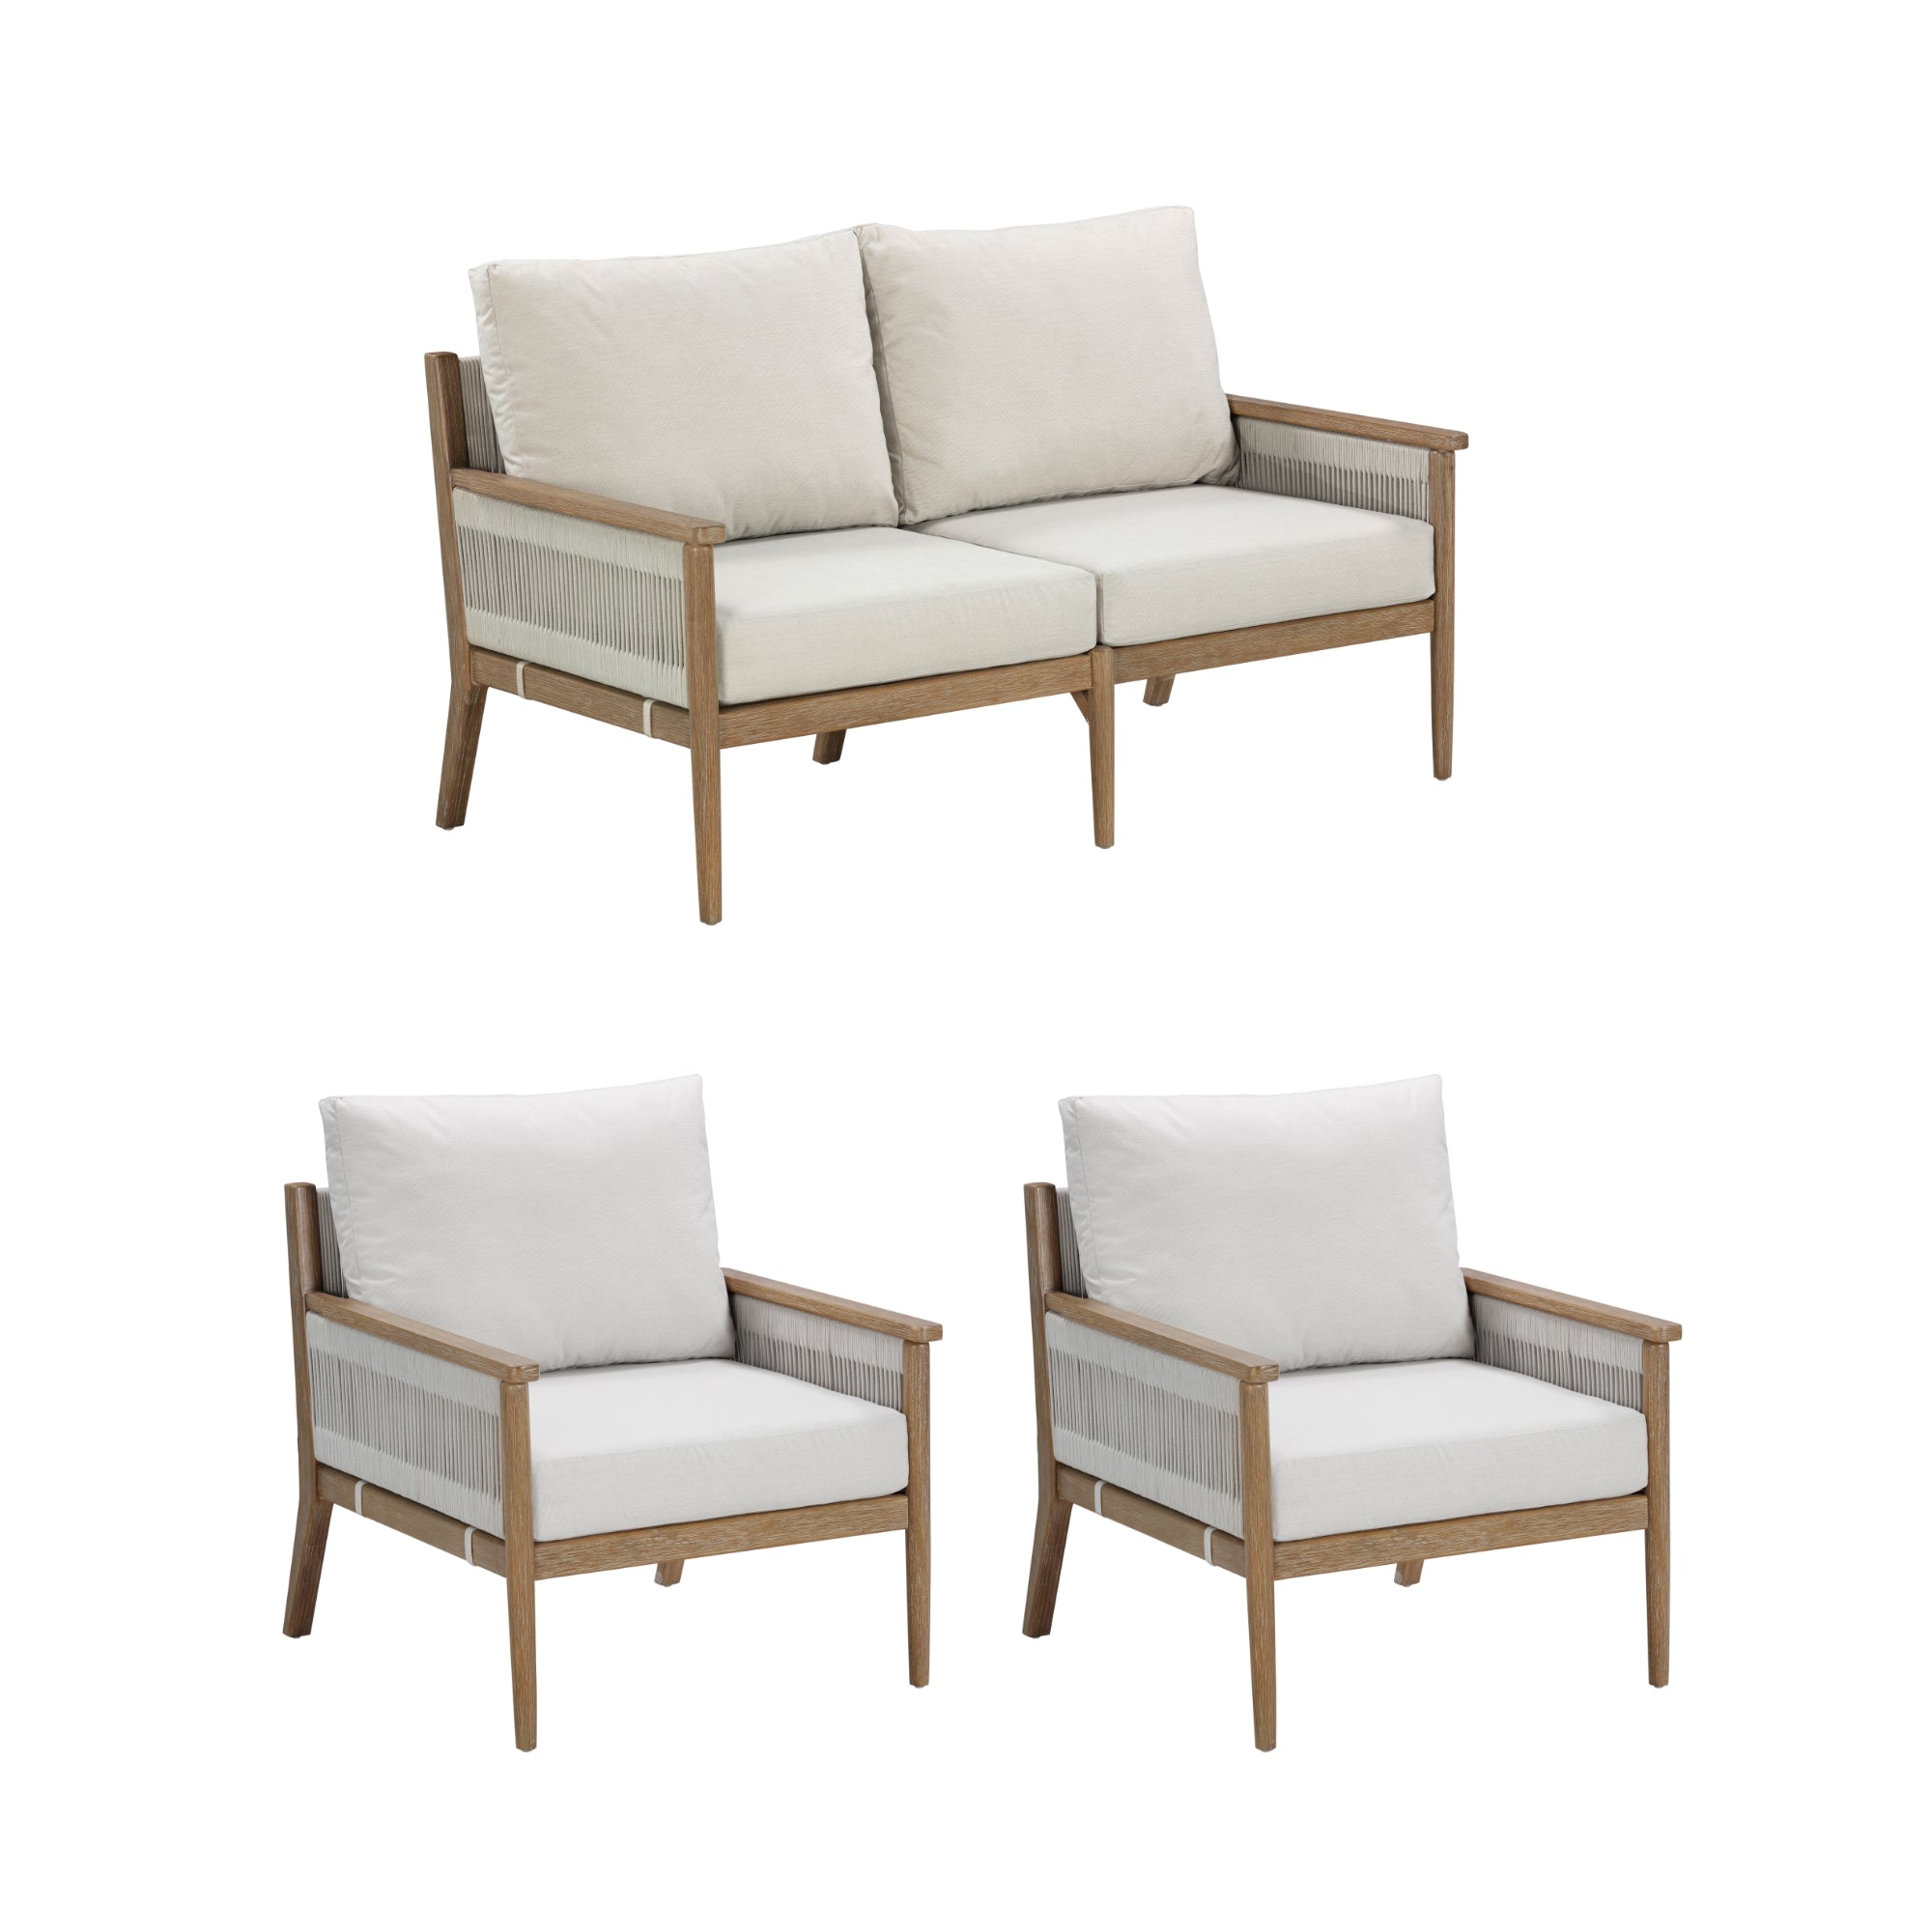 Outdoor Set Rope Loveseat & 2 Chairs